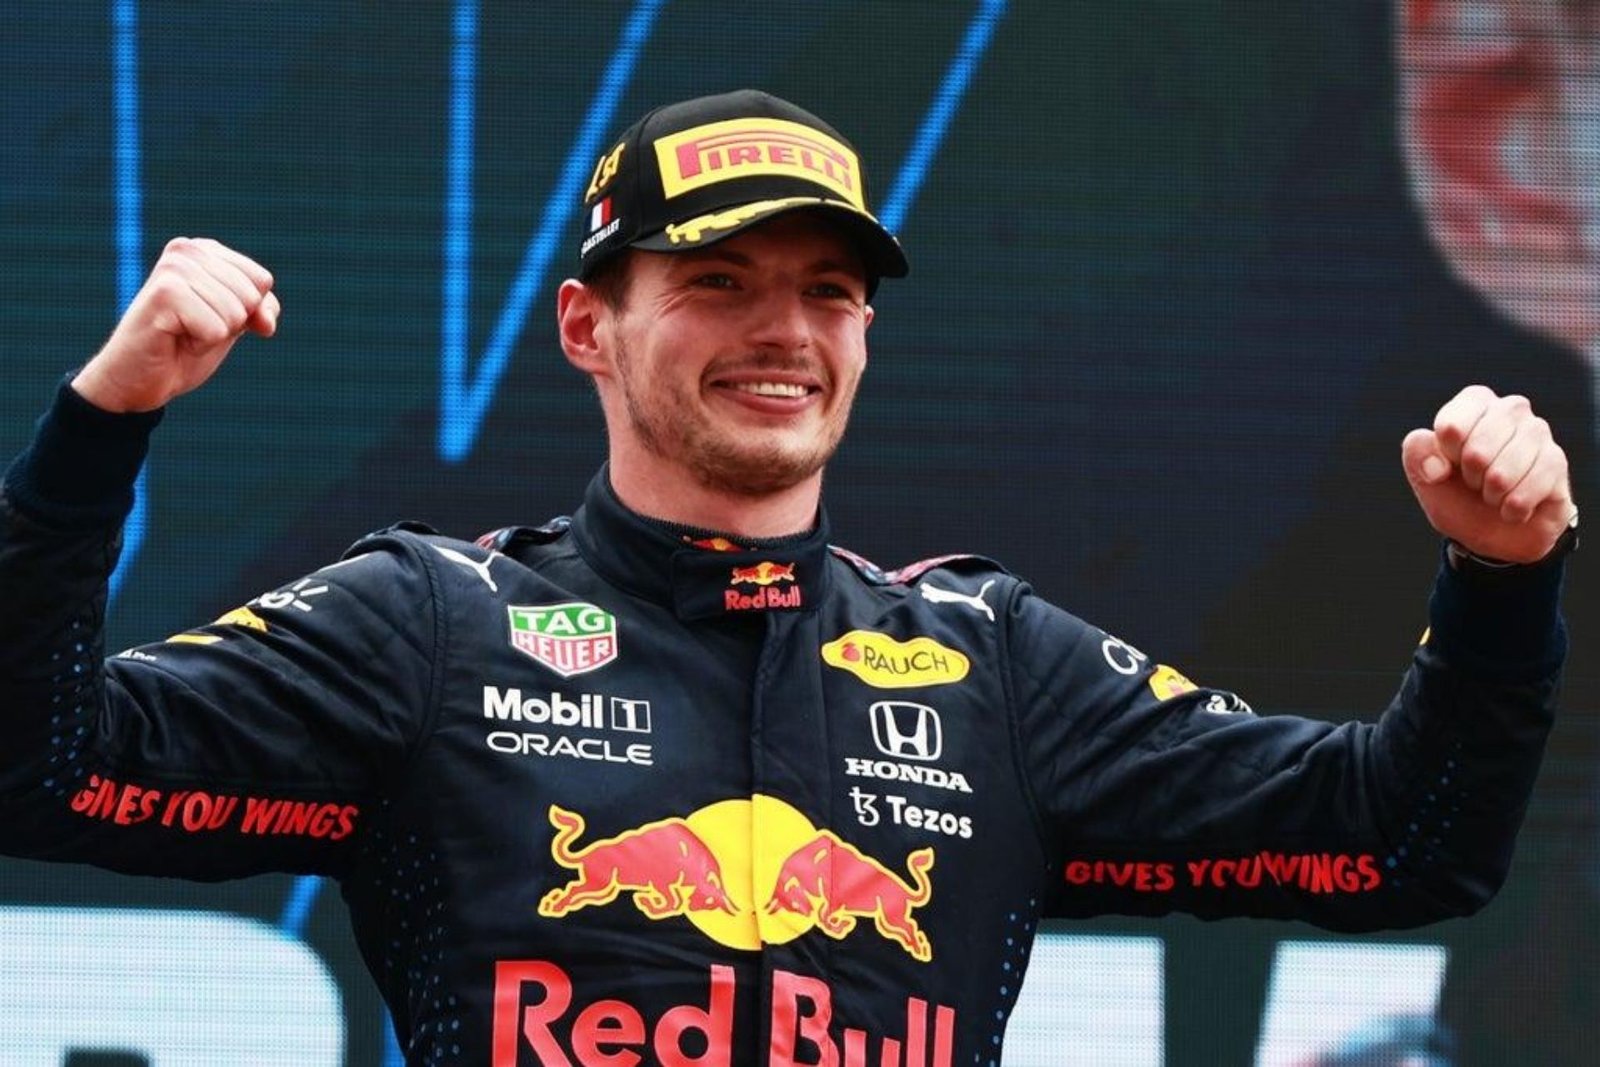 Max Verstappen Is Defeating Lewis Hamilton In The French Grand Prix, Extending His Formula 1 Lead.